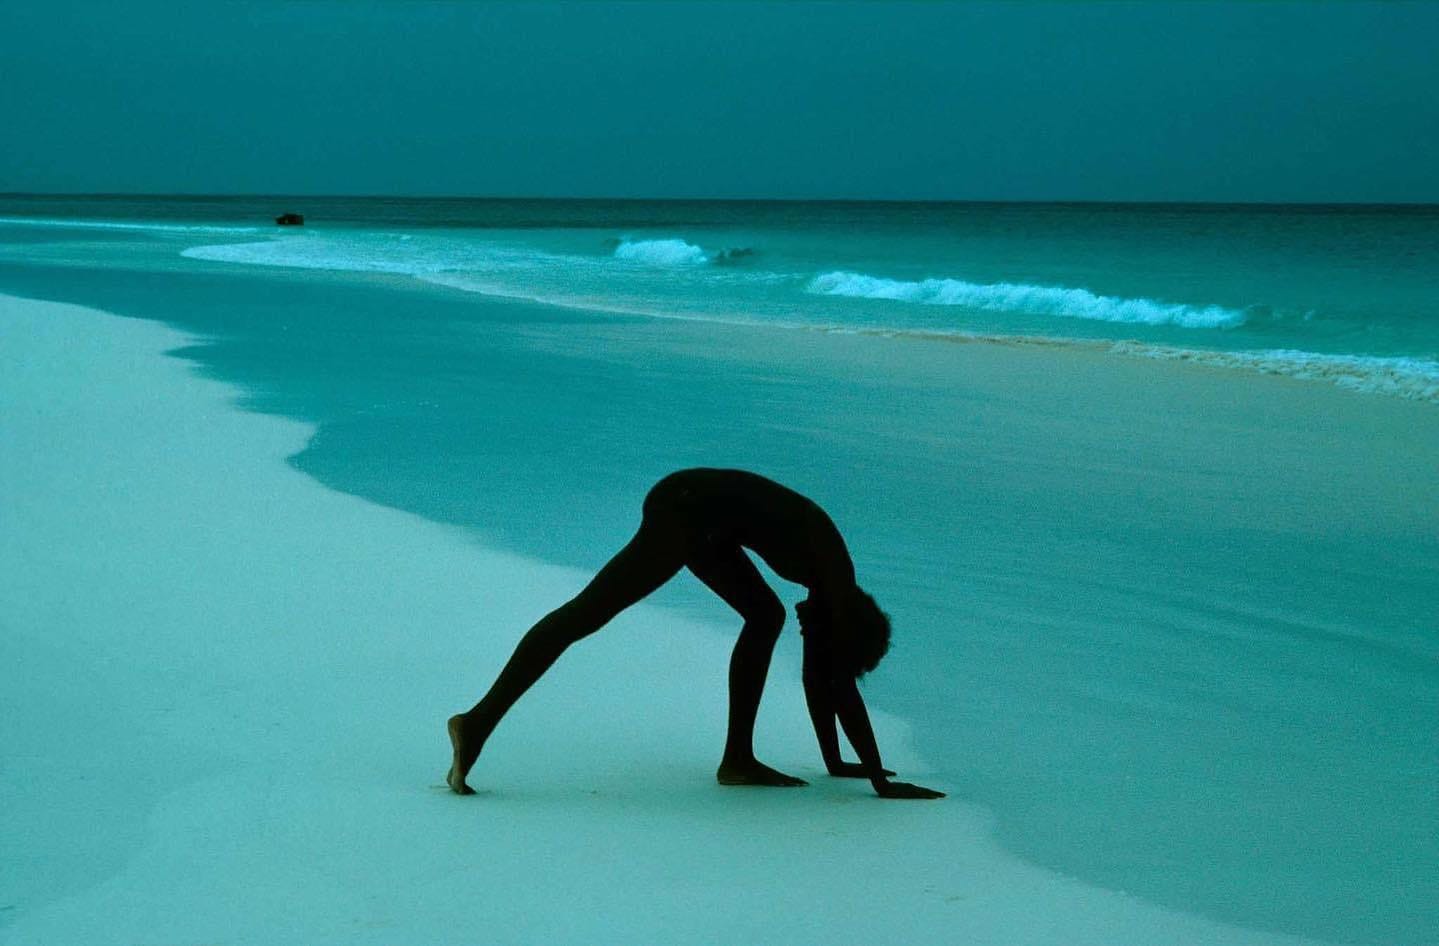 May be an image of 1 person, practising yoga, beach and ocean